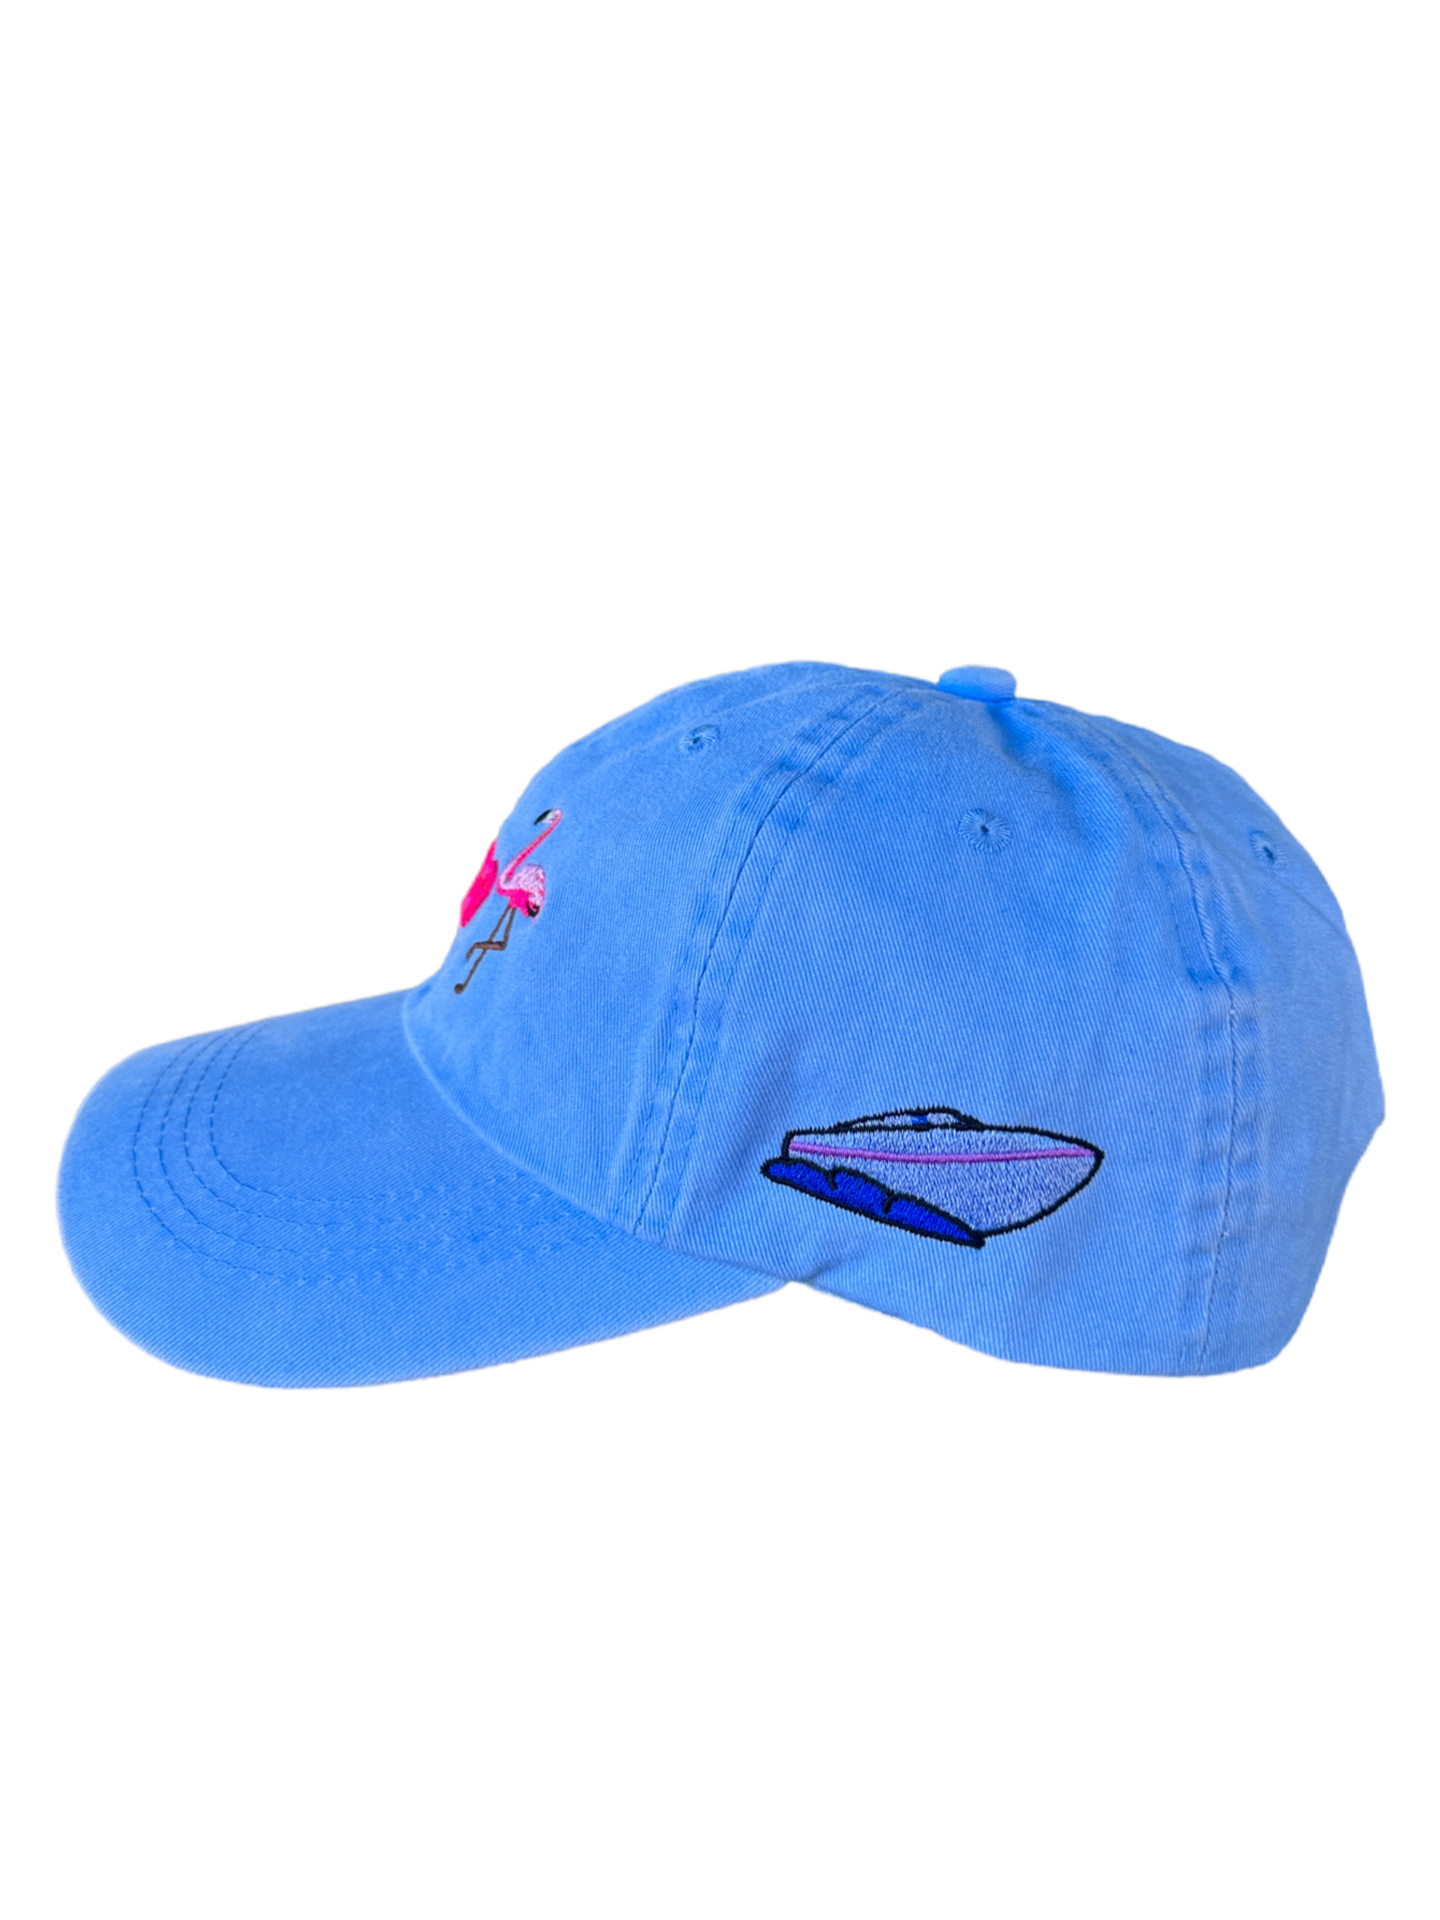 22NJ Miami Beach Collector Series Washed Blue Cap